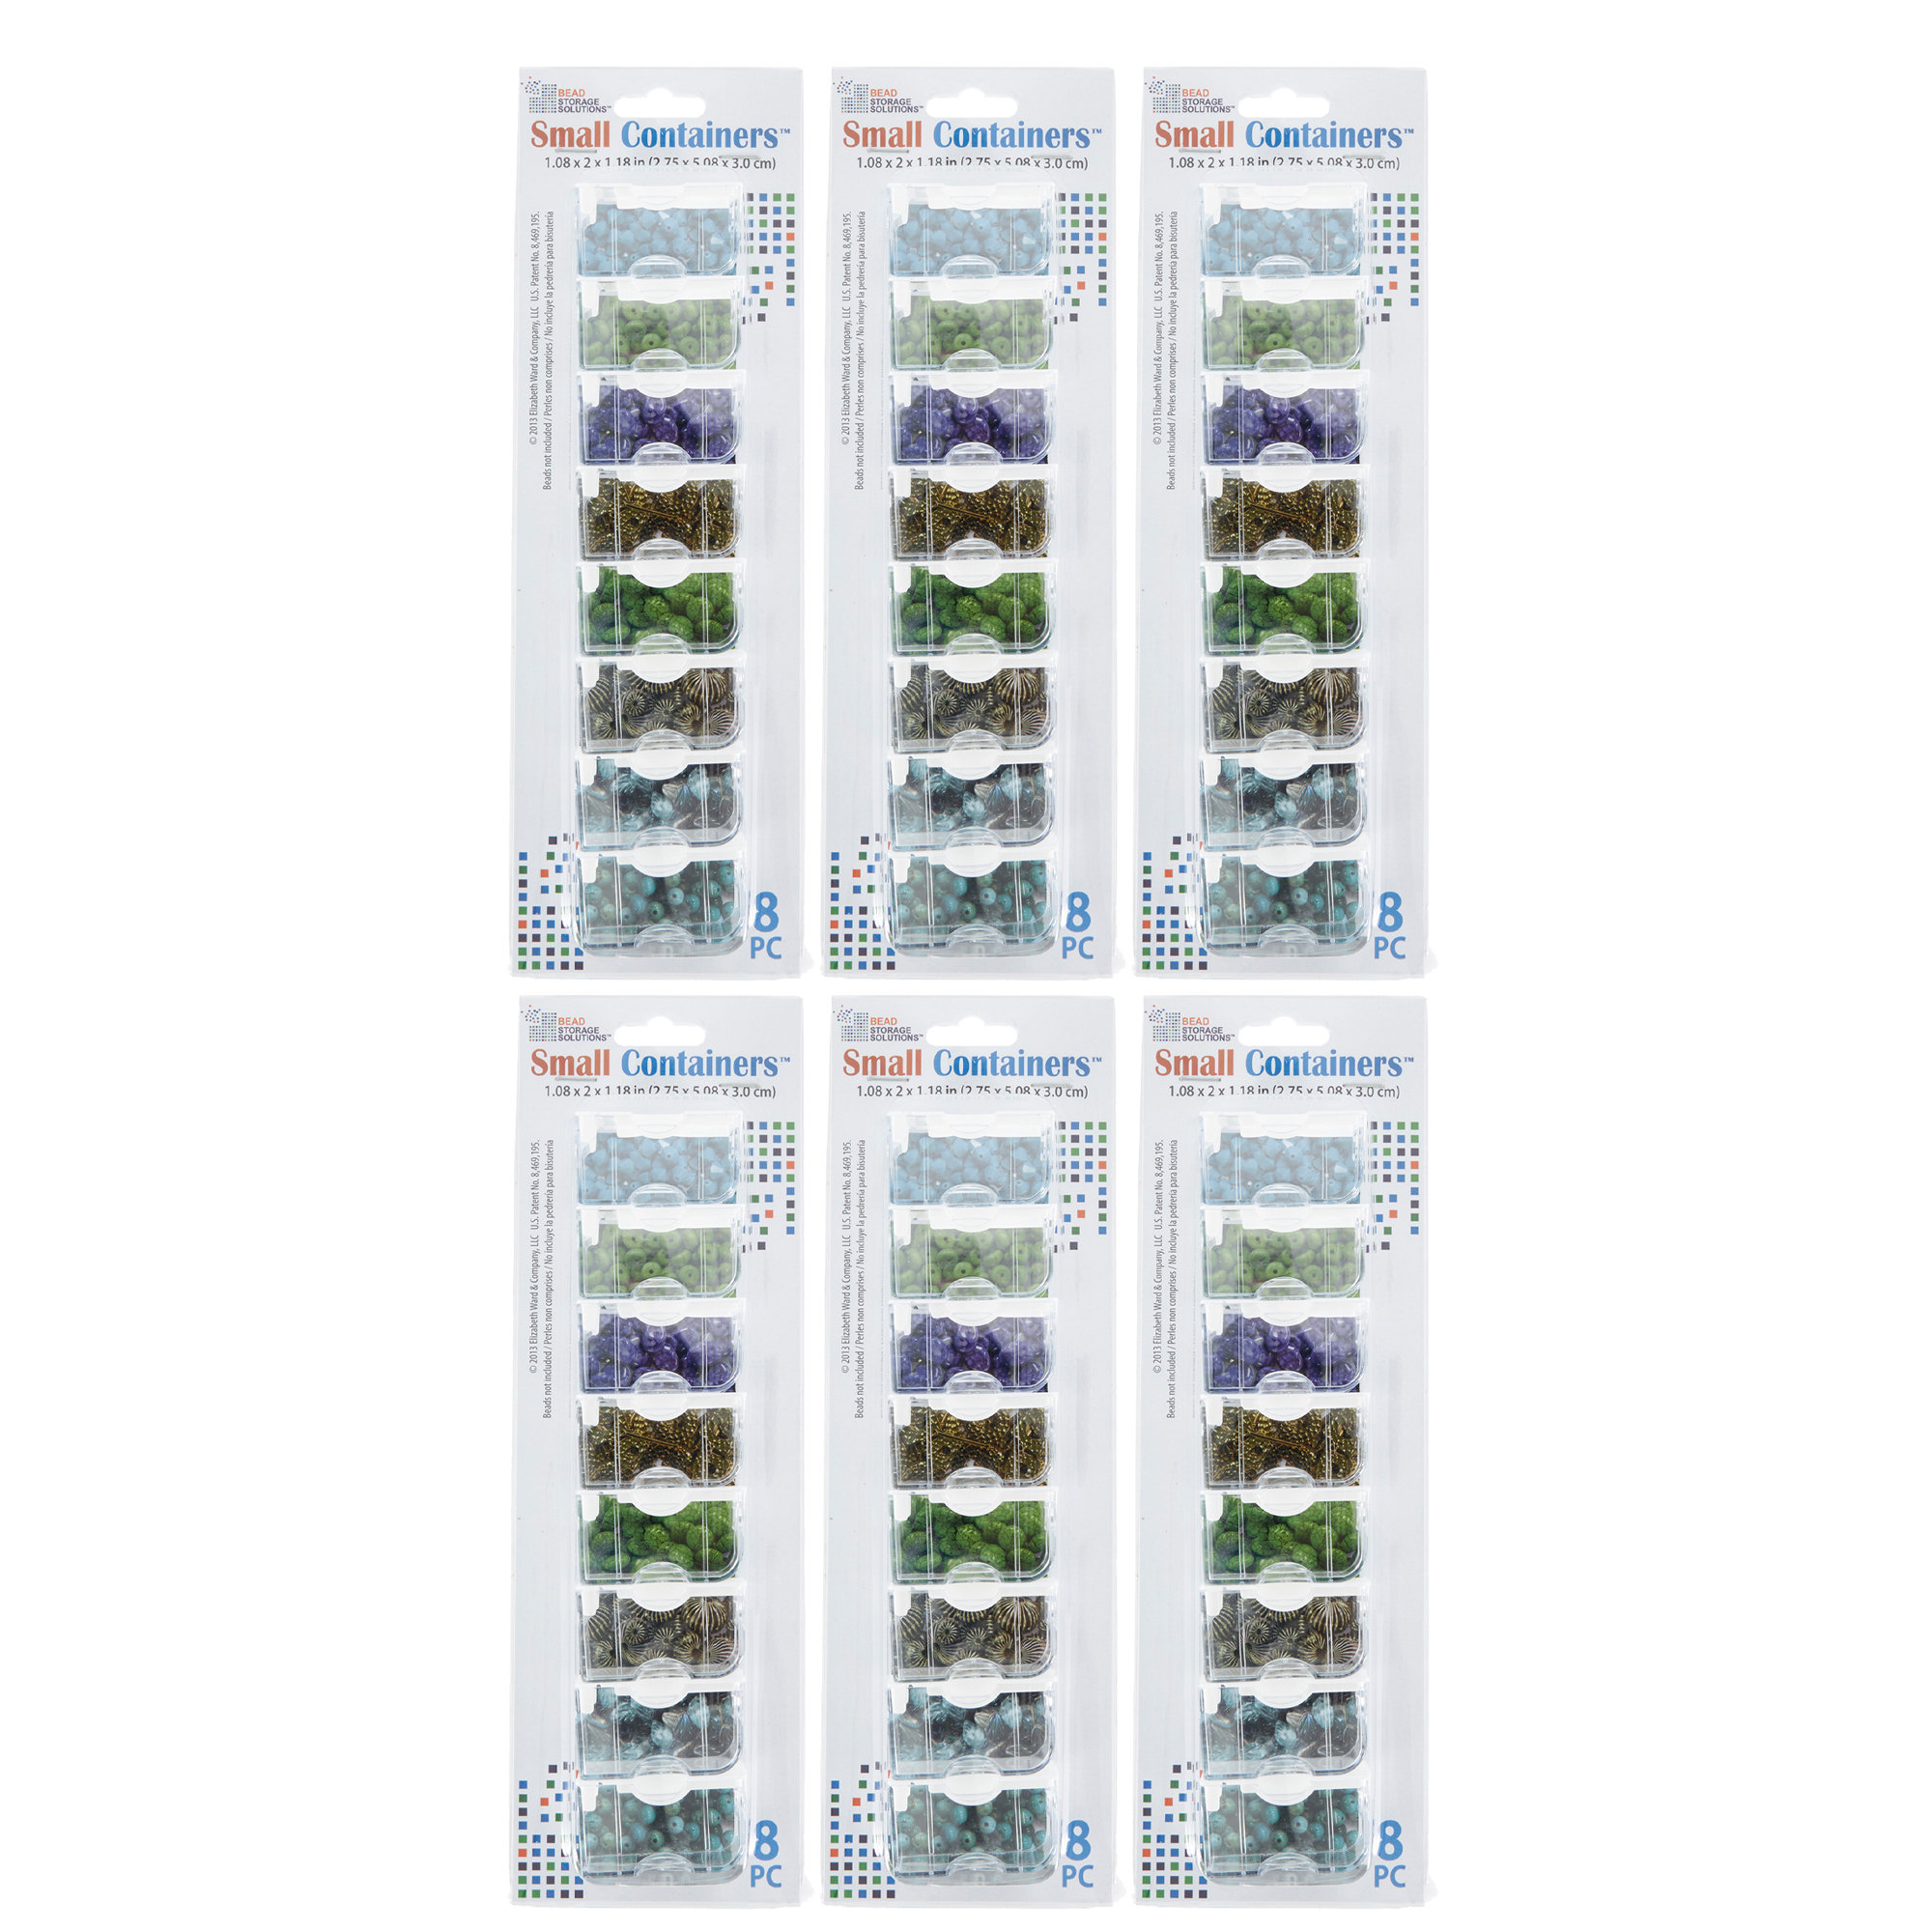  Bead Storage Solutions Elizabeth Ward 5 Piece Bead Clear  Organizing Storage Containers for Small Beads, Crystals, Fasteners, and  More, Medium : Arts, Crafts & Sewing